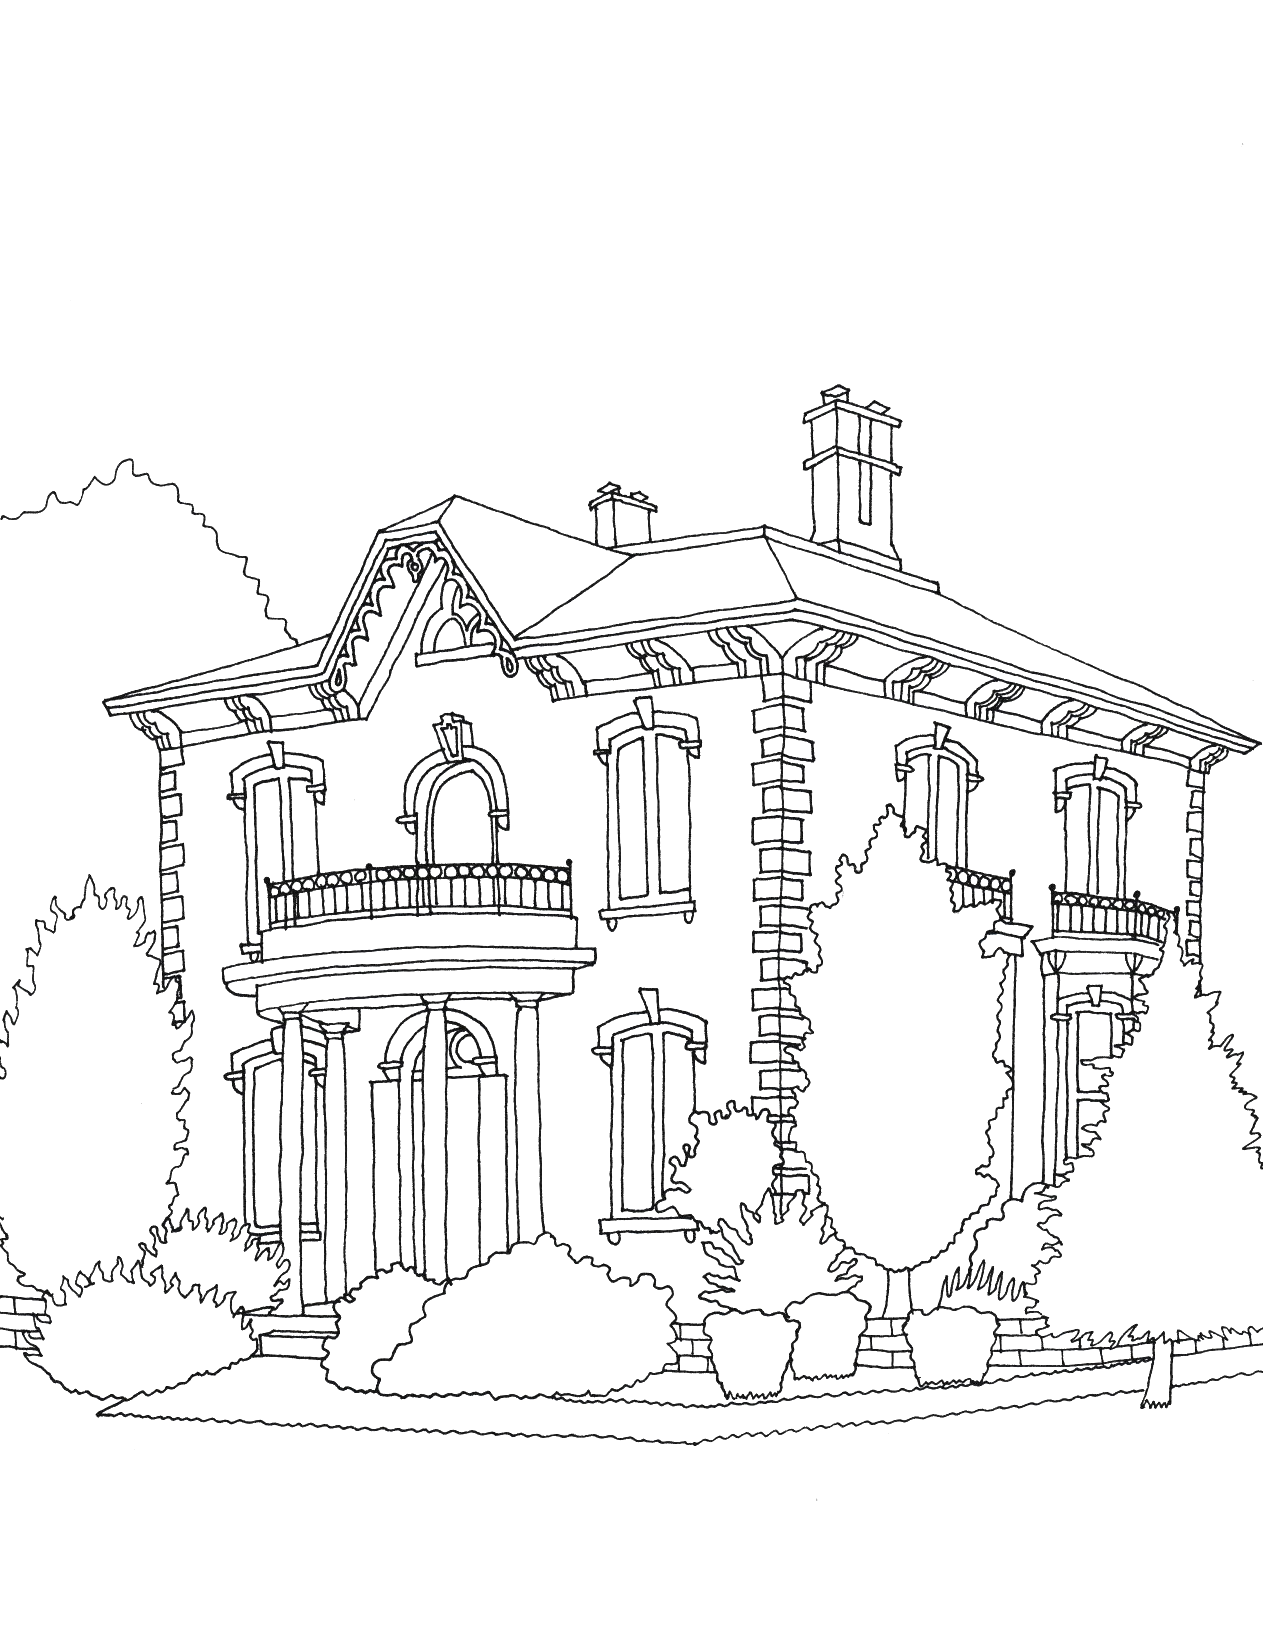 Architecture Coloring Pages Printable Pdf - Printable Architecture Coloring Pages